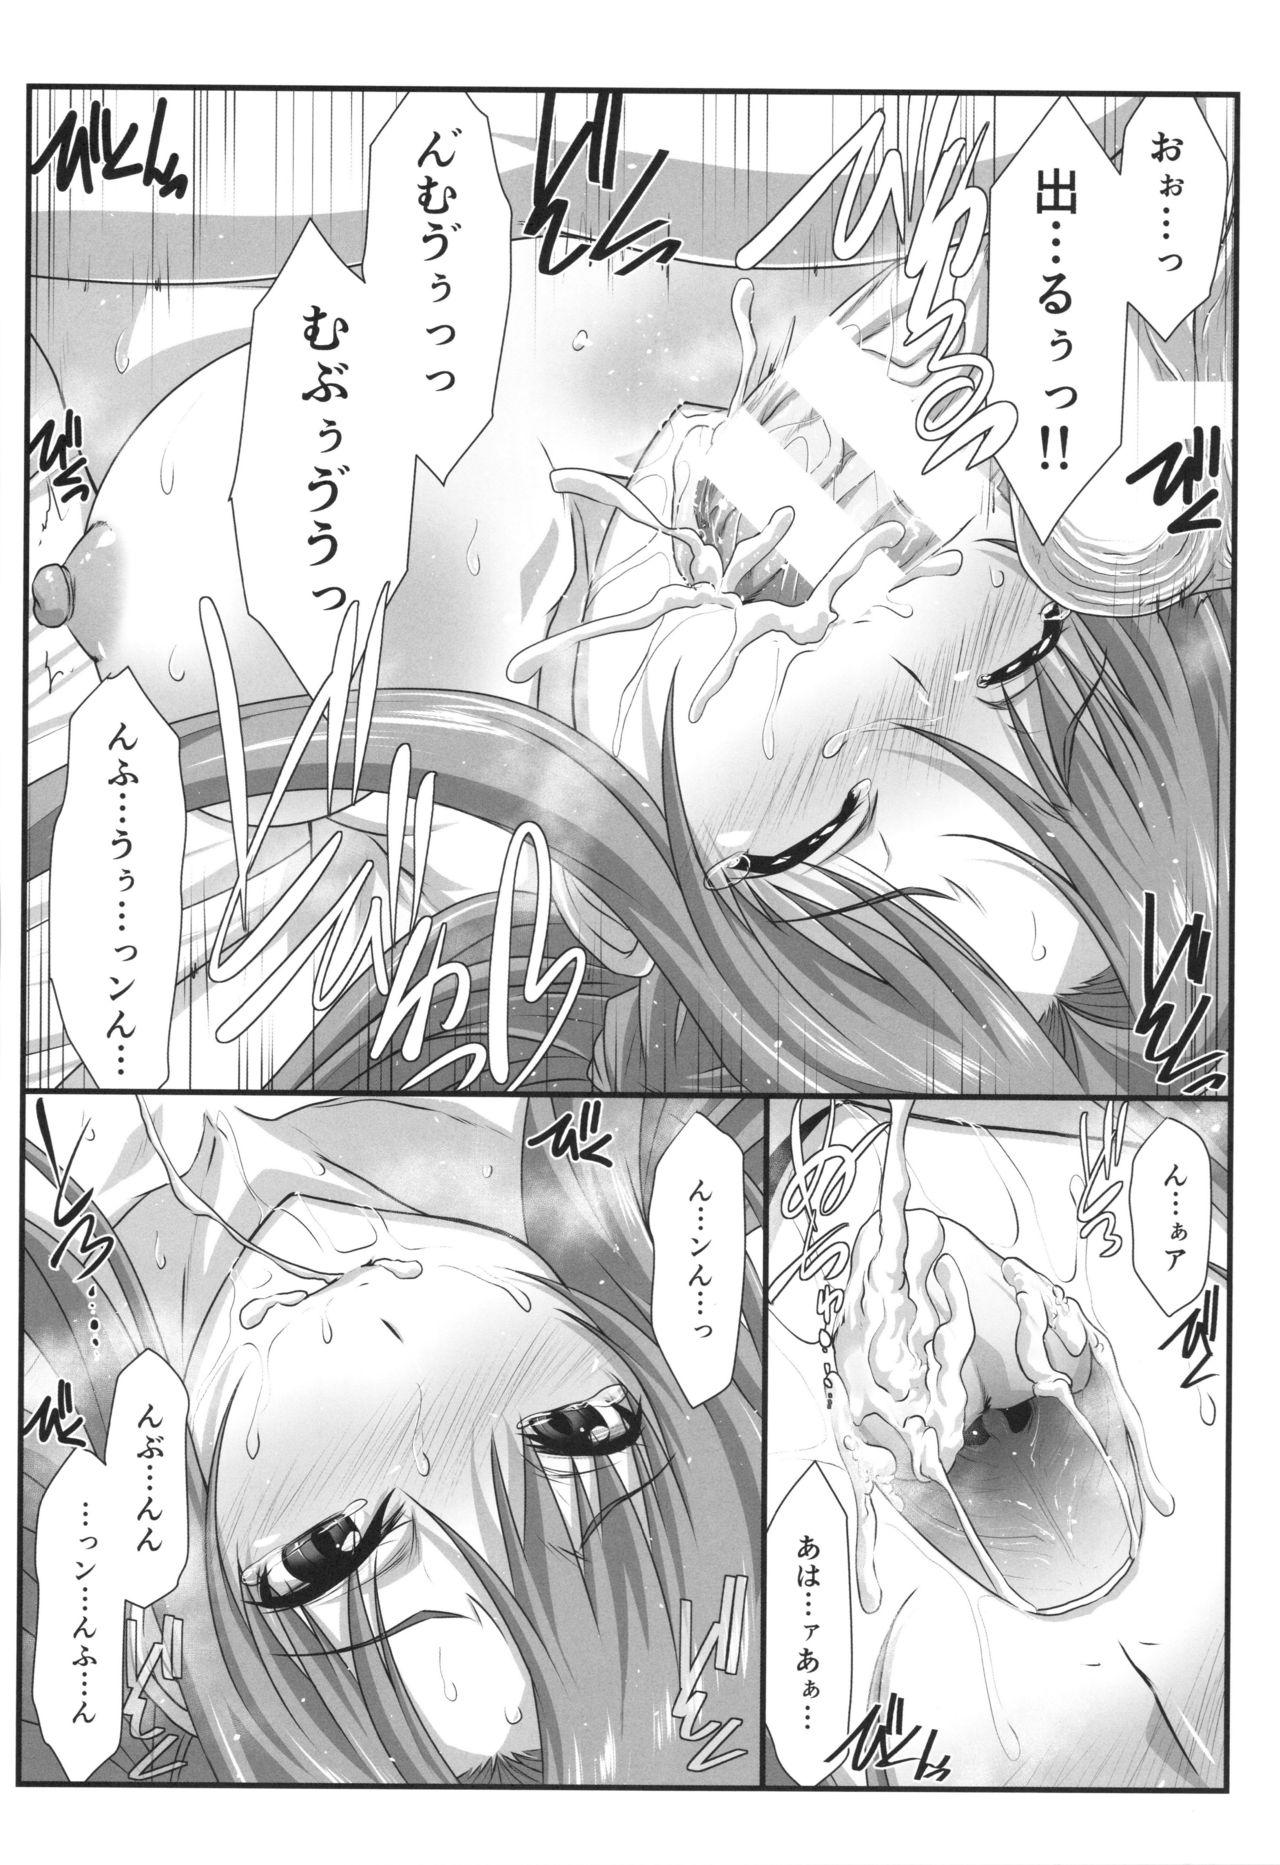 Thylinh Astral Bout Ver. 41 - Sword art online Sex - Page 9